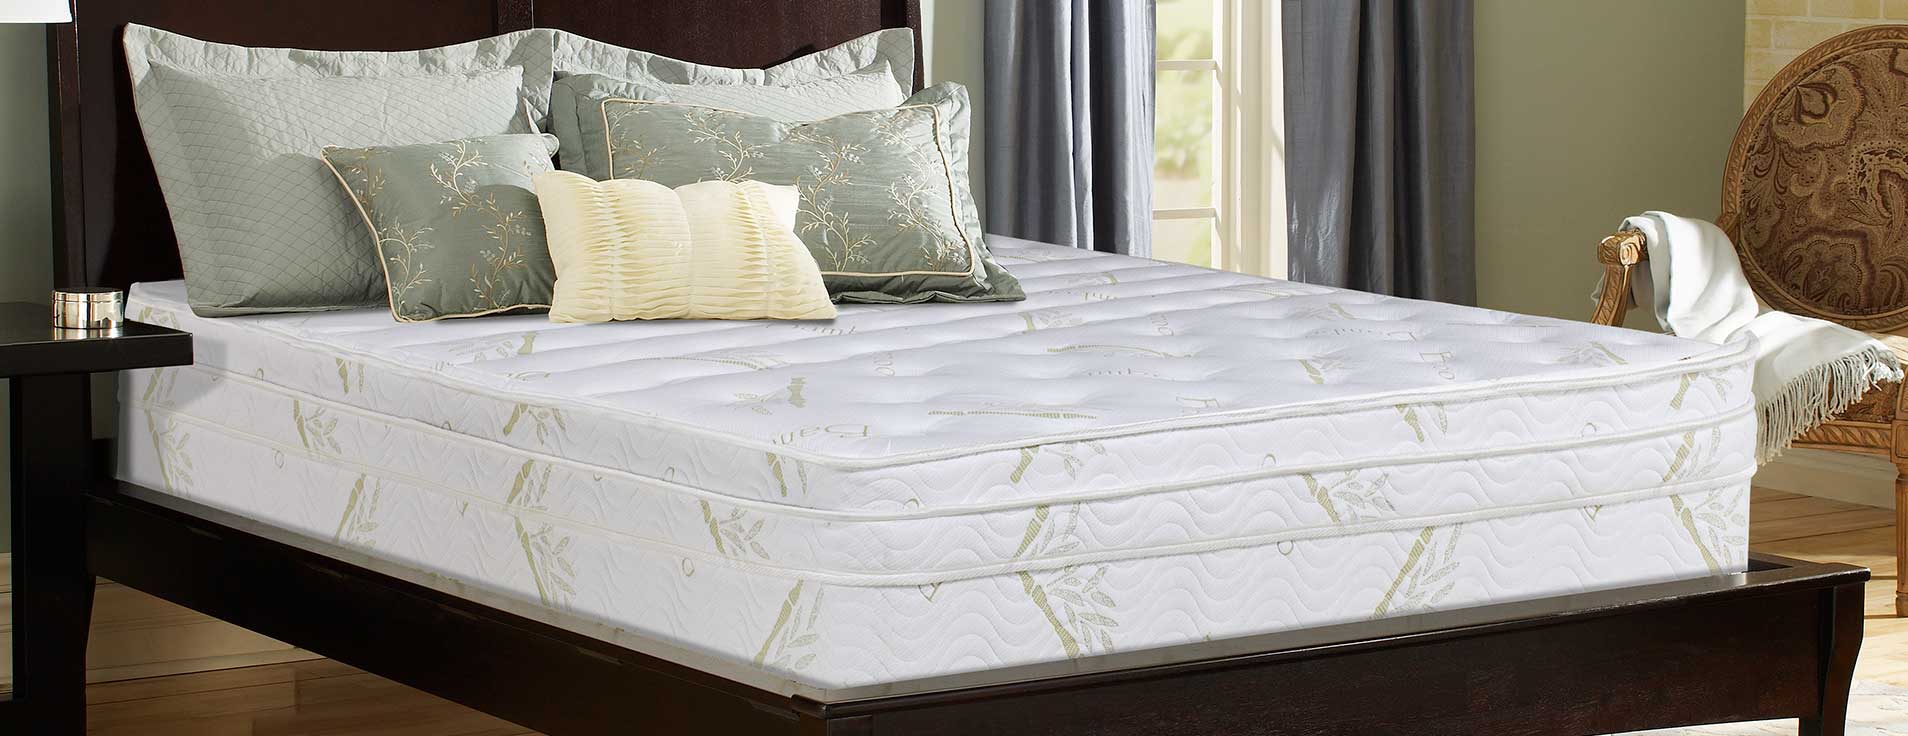 boyd waterbed mattress cover